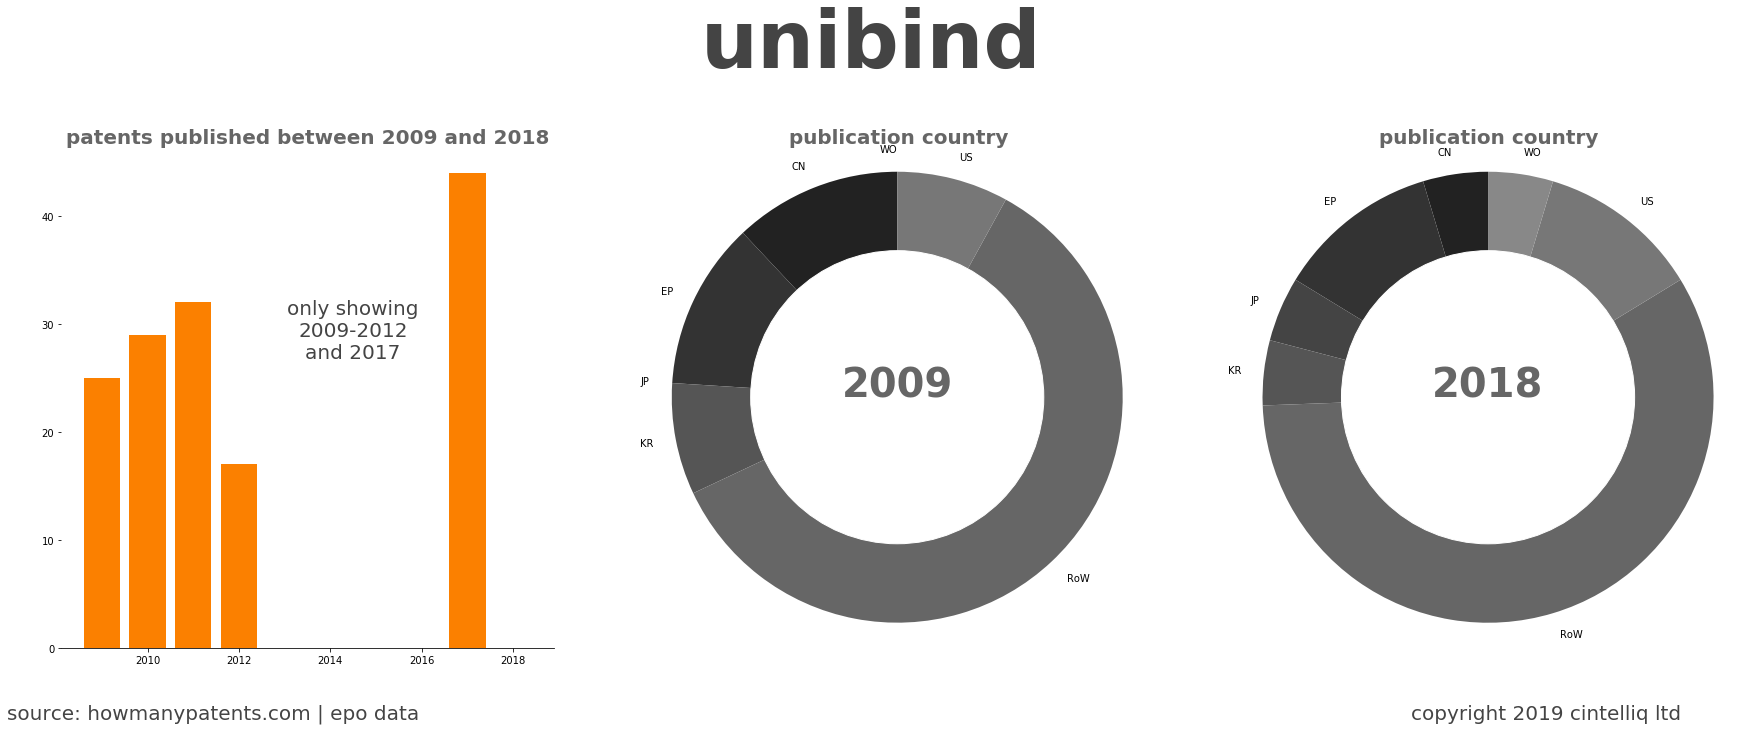 summary of patents for Unibind